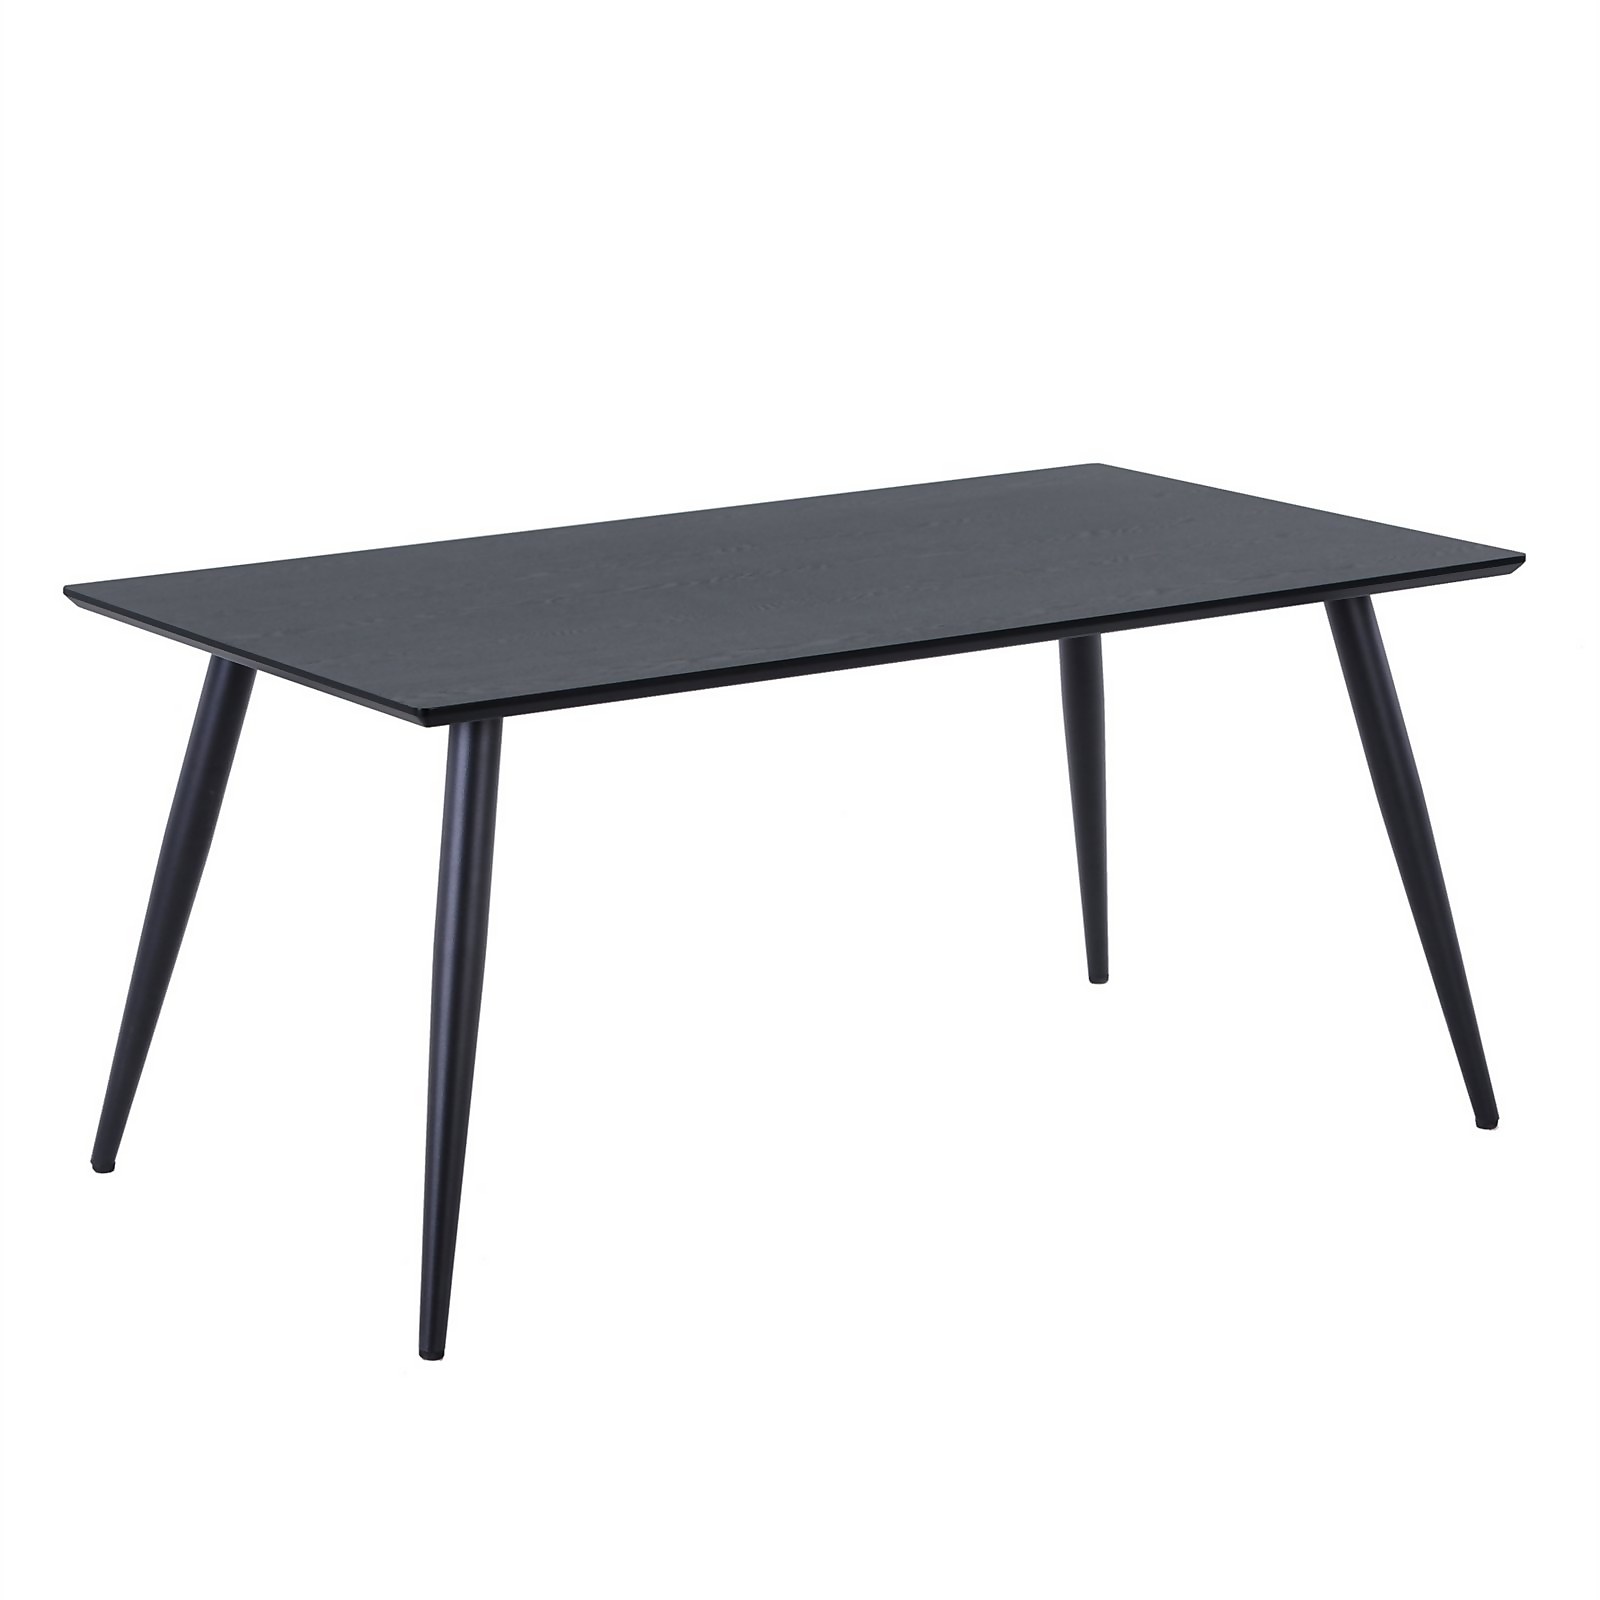 Photo of Illona Dining Table